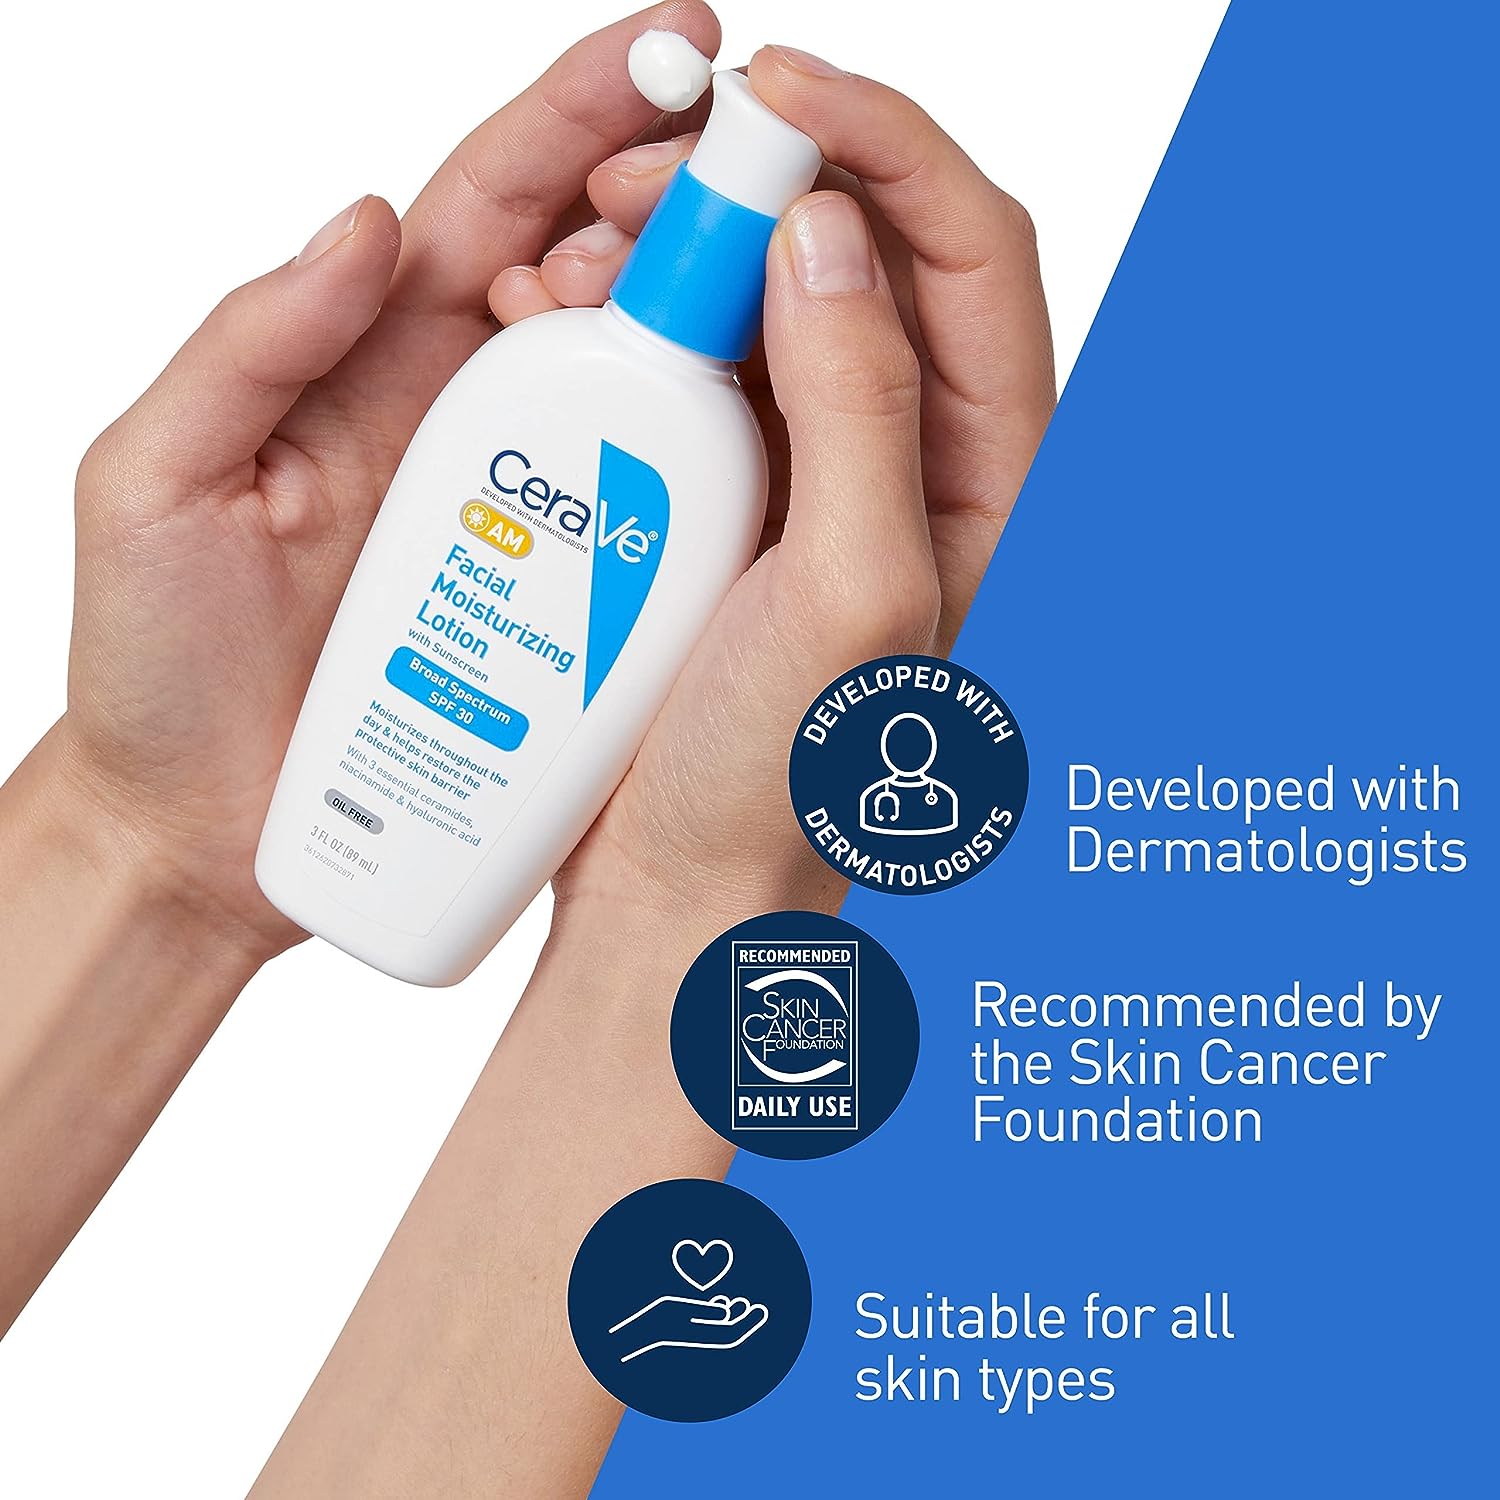 CeraVe Facial Moisturizing Lotion with Sunscreen